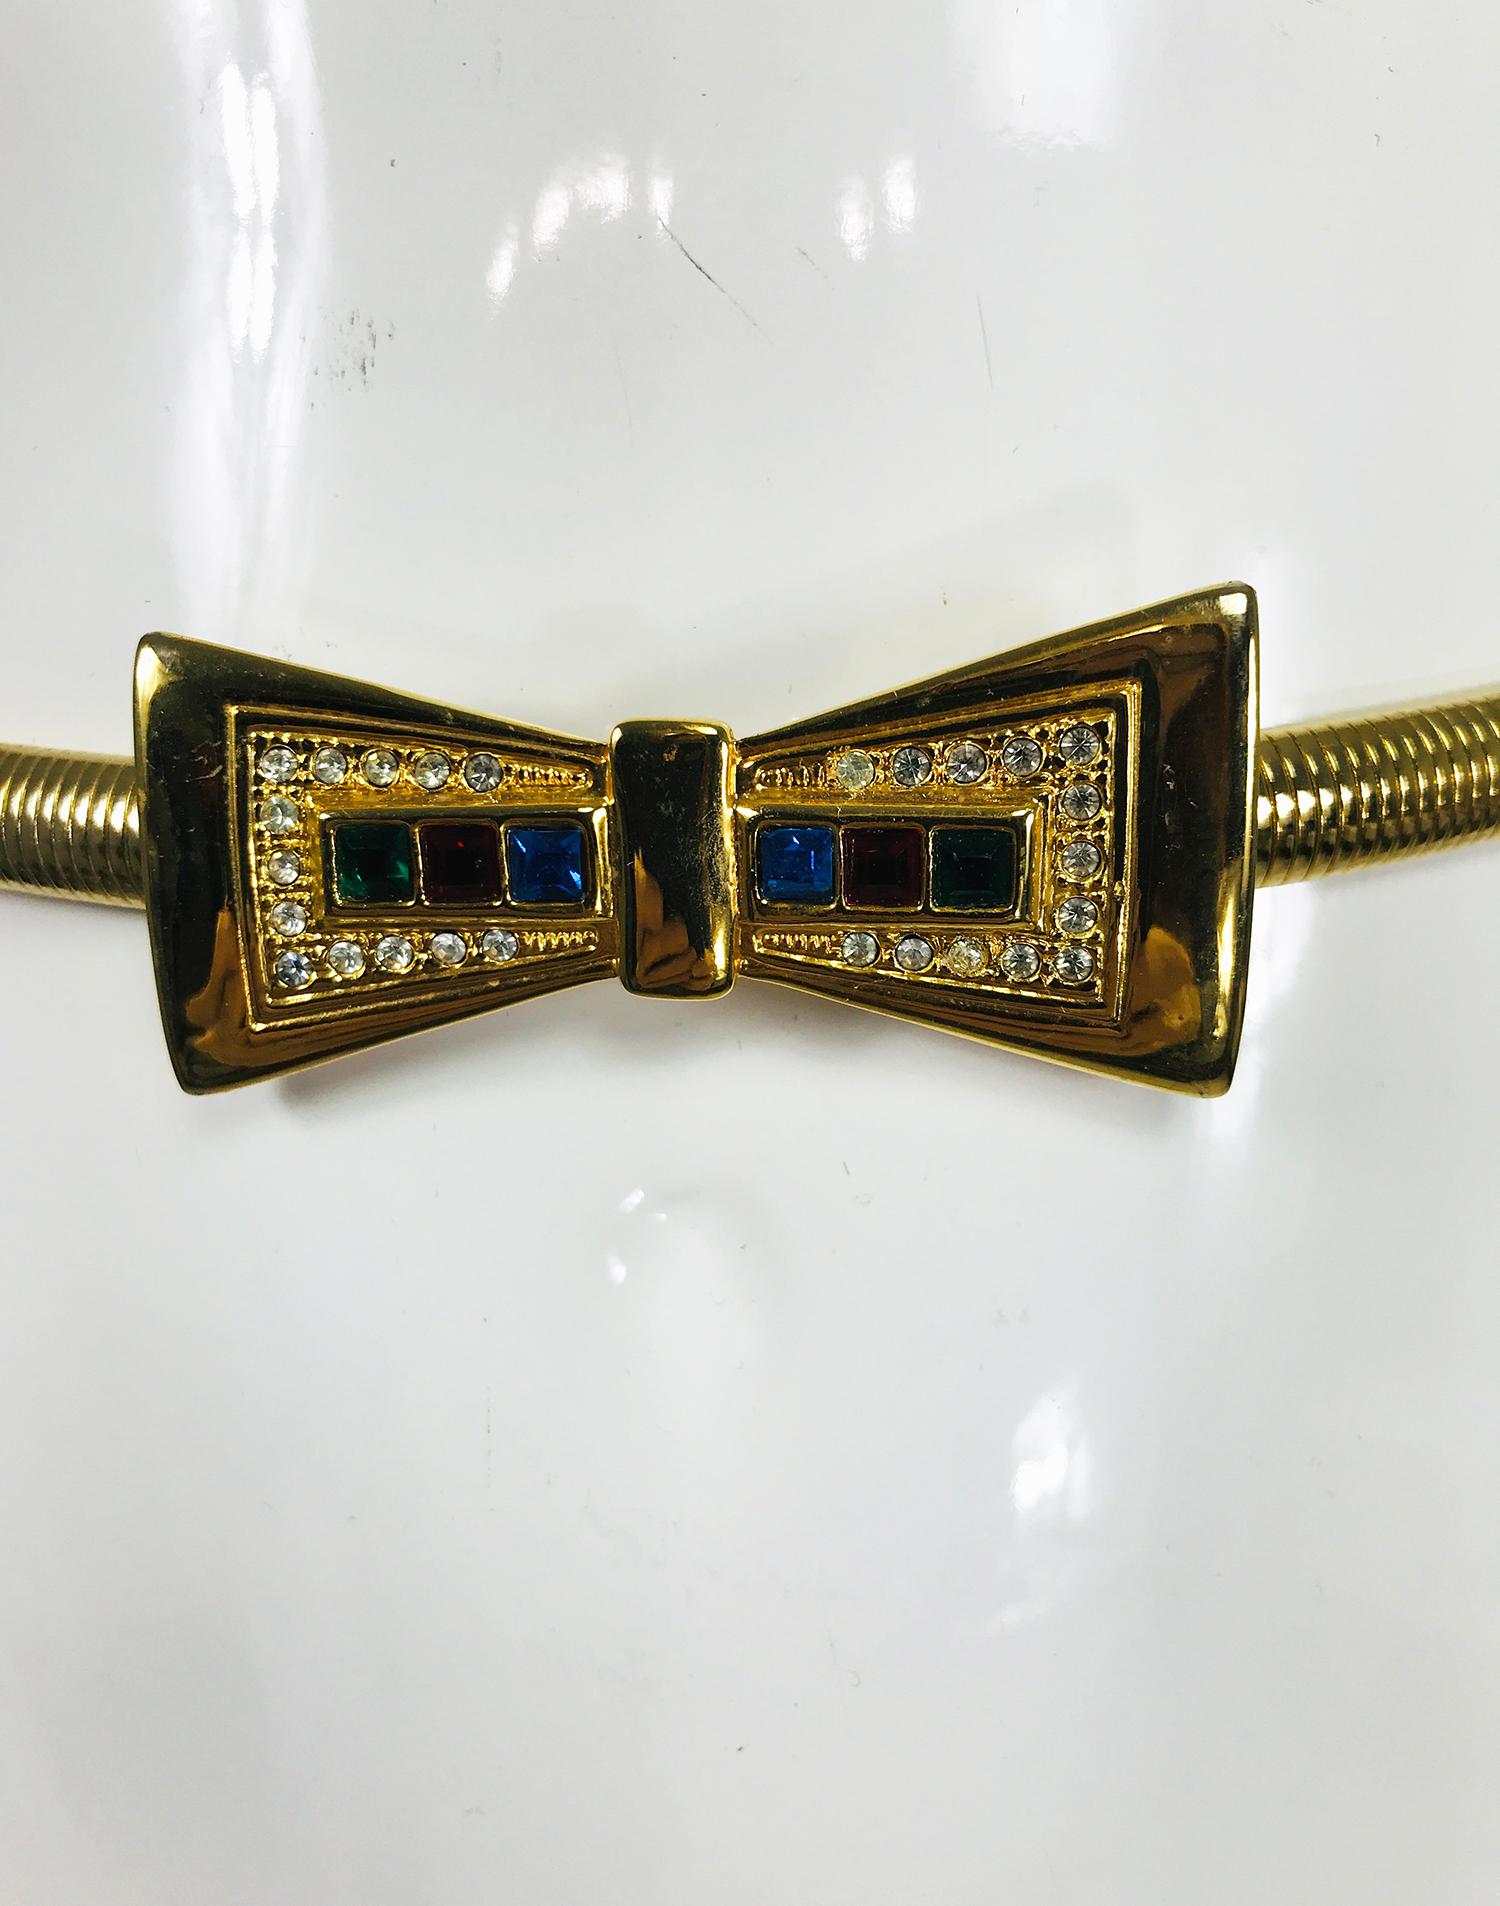 Sleek vintage gold metal rhinestone set bow buckle with expandable/stretch metal belt from the 1960s. The buckle at the front is shiny gold metal each side of the bow inside is set with a surround of crystal rhinestones and a bar of square bezel